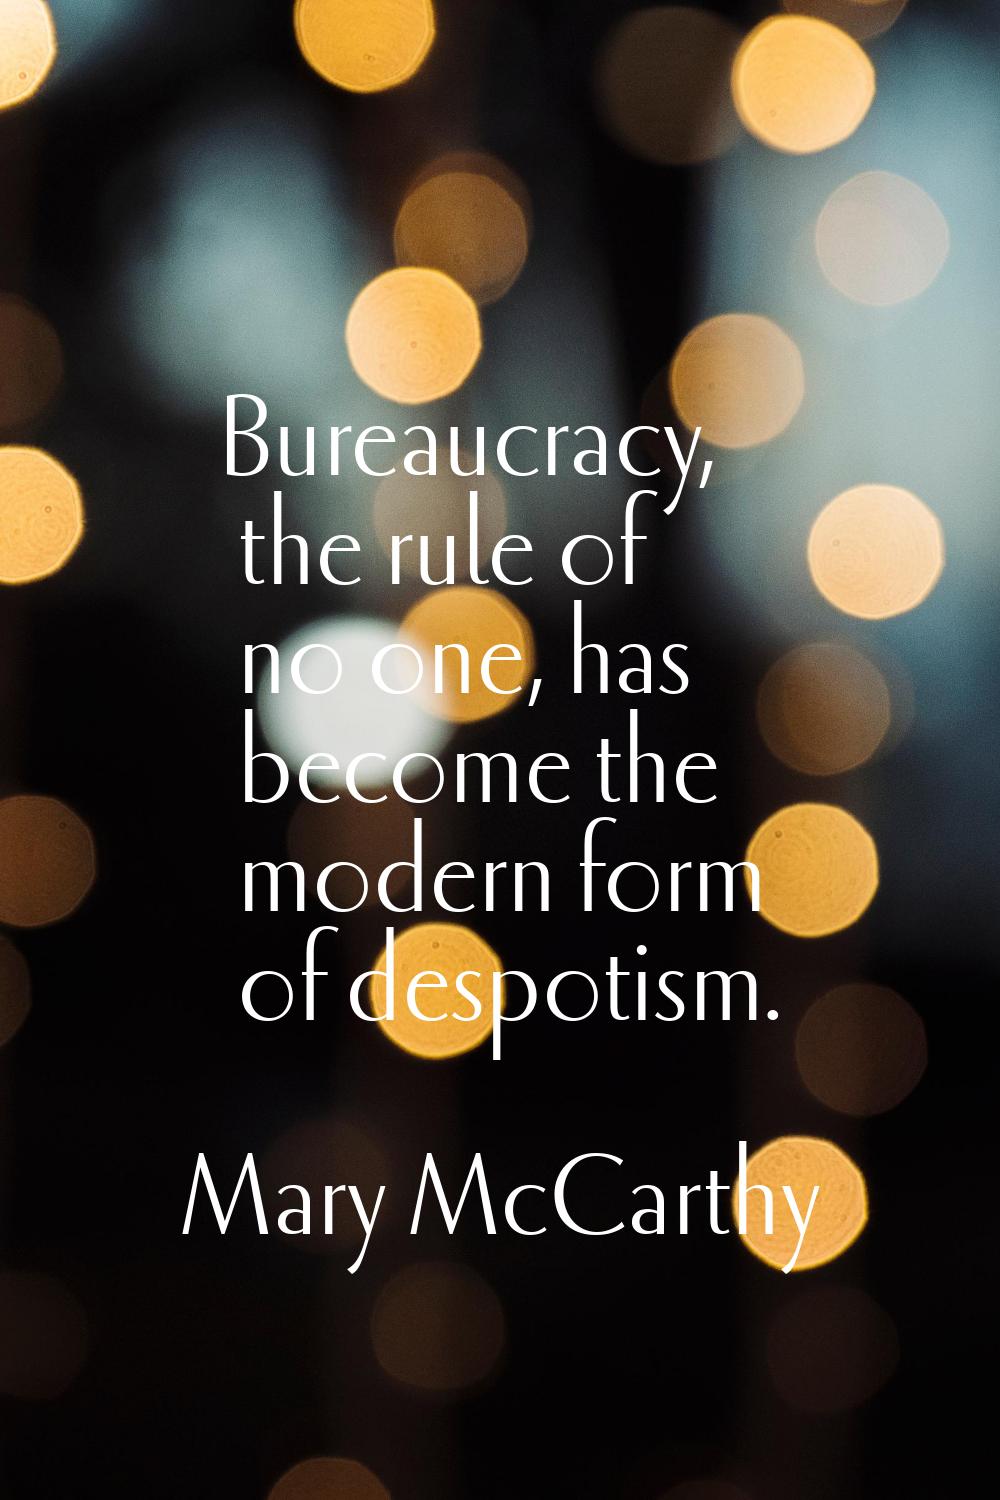 Bureaucracy, the rule of no one, has become the modern form of despotism.